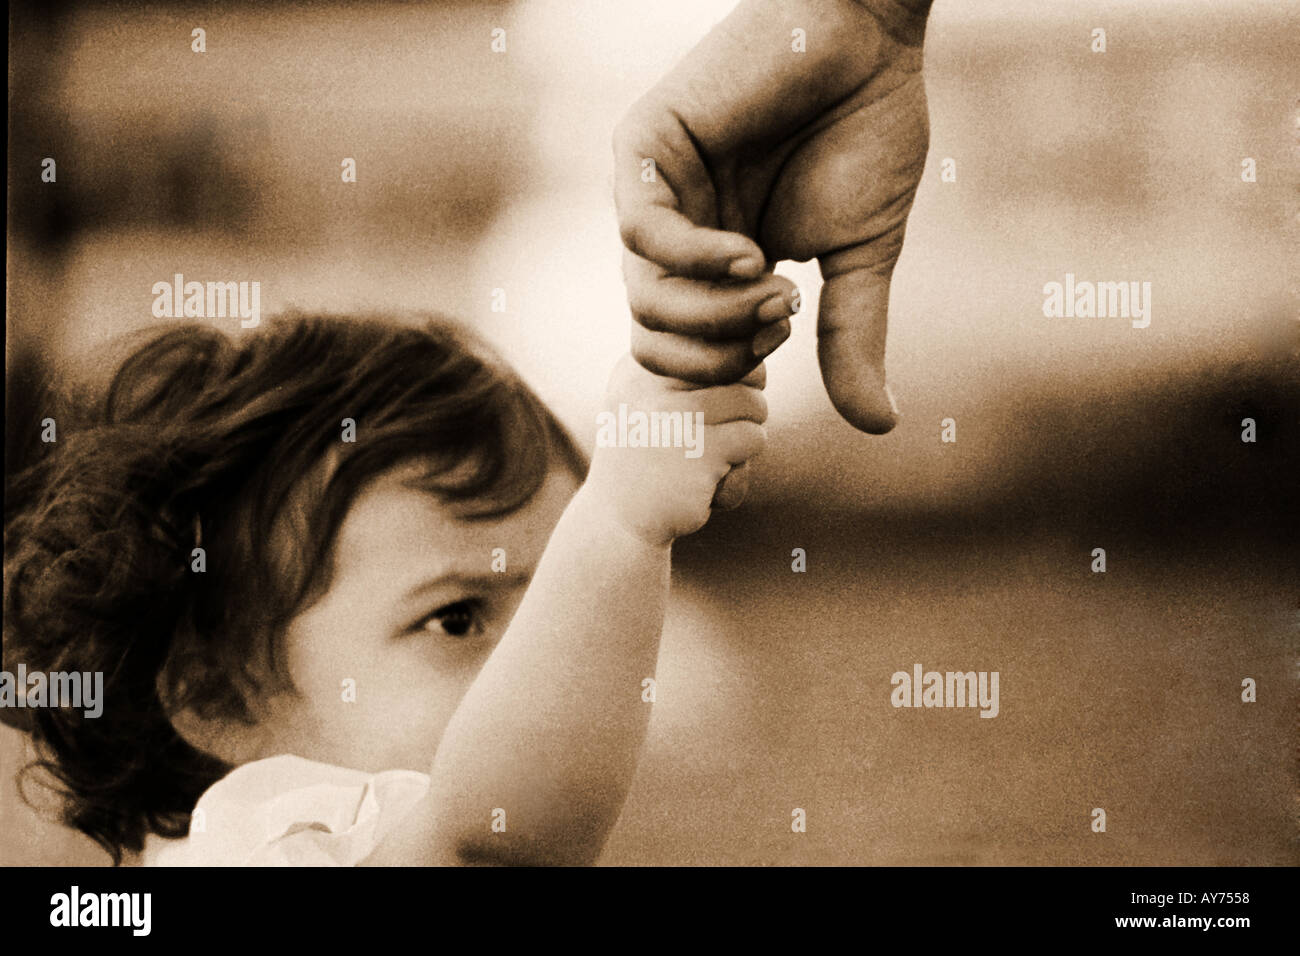 Small young girl child only one eye visible holding trusted fathers hands little finger Stock Photo